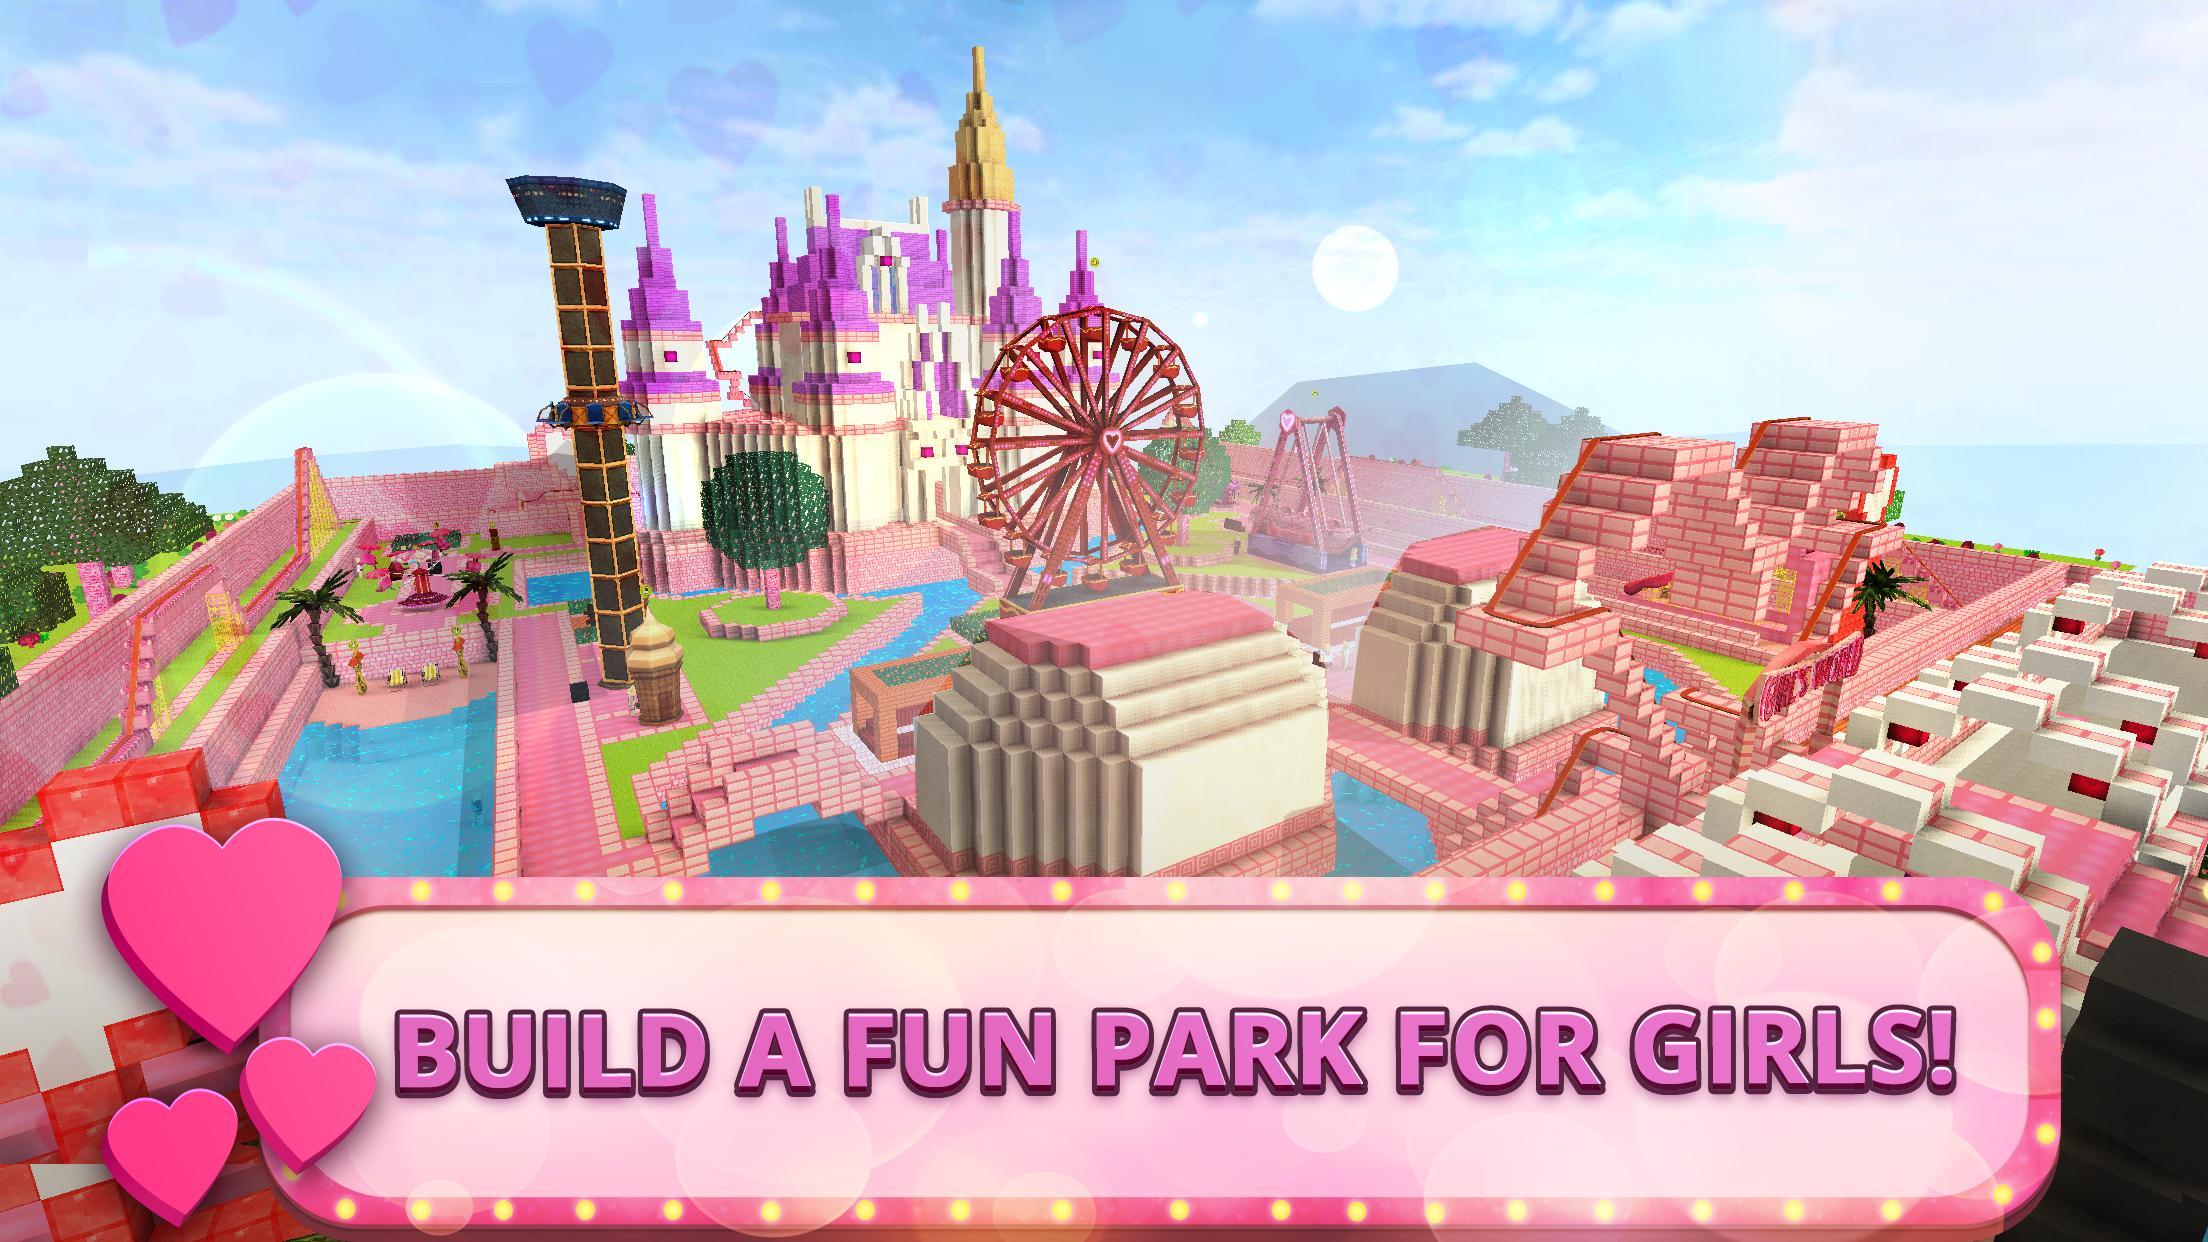 Girls Theme Park Craft Water Slide Fun Park Games For Android Apk Download - gamer girl roblox amusement park